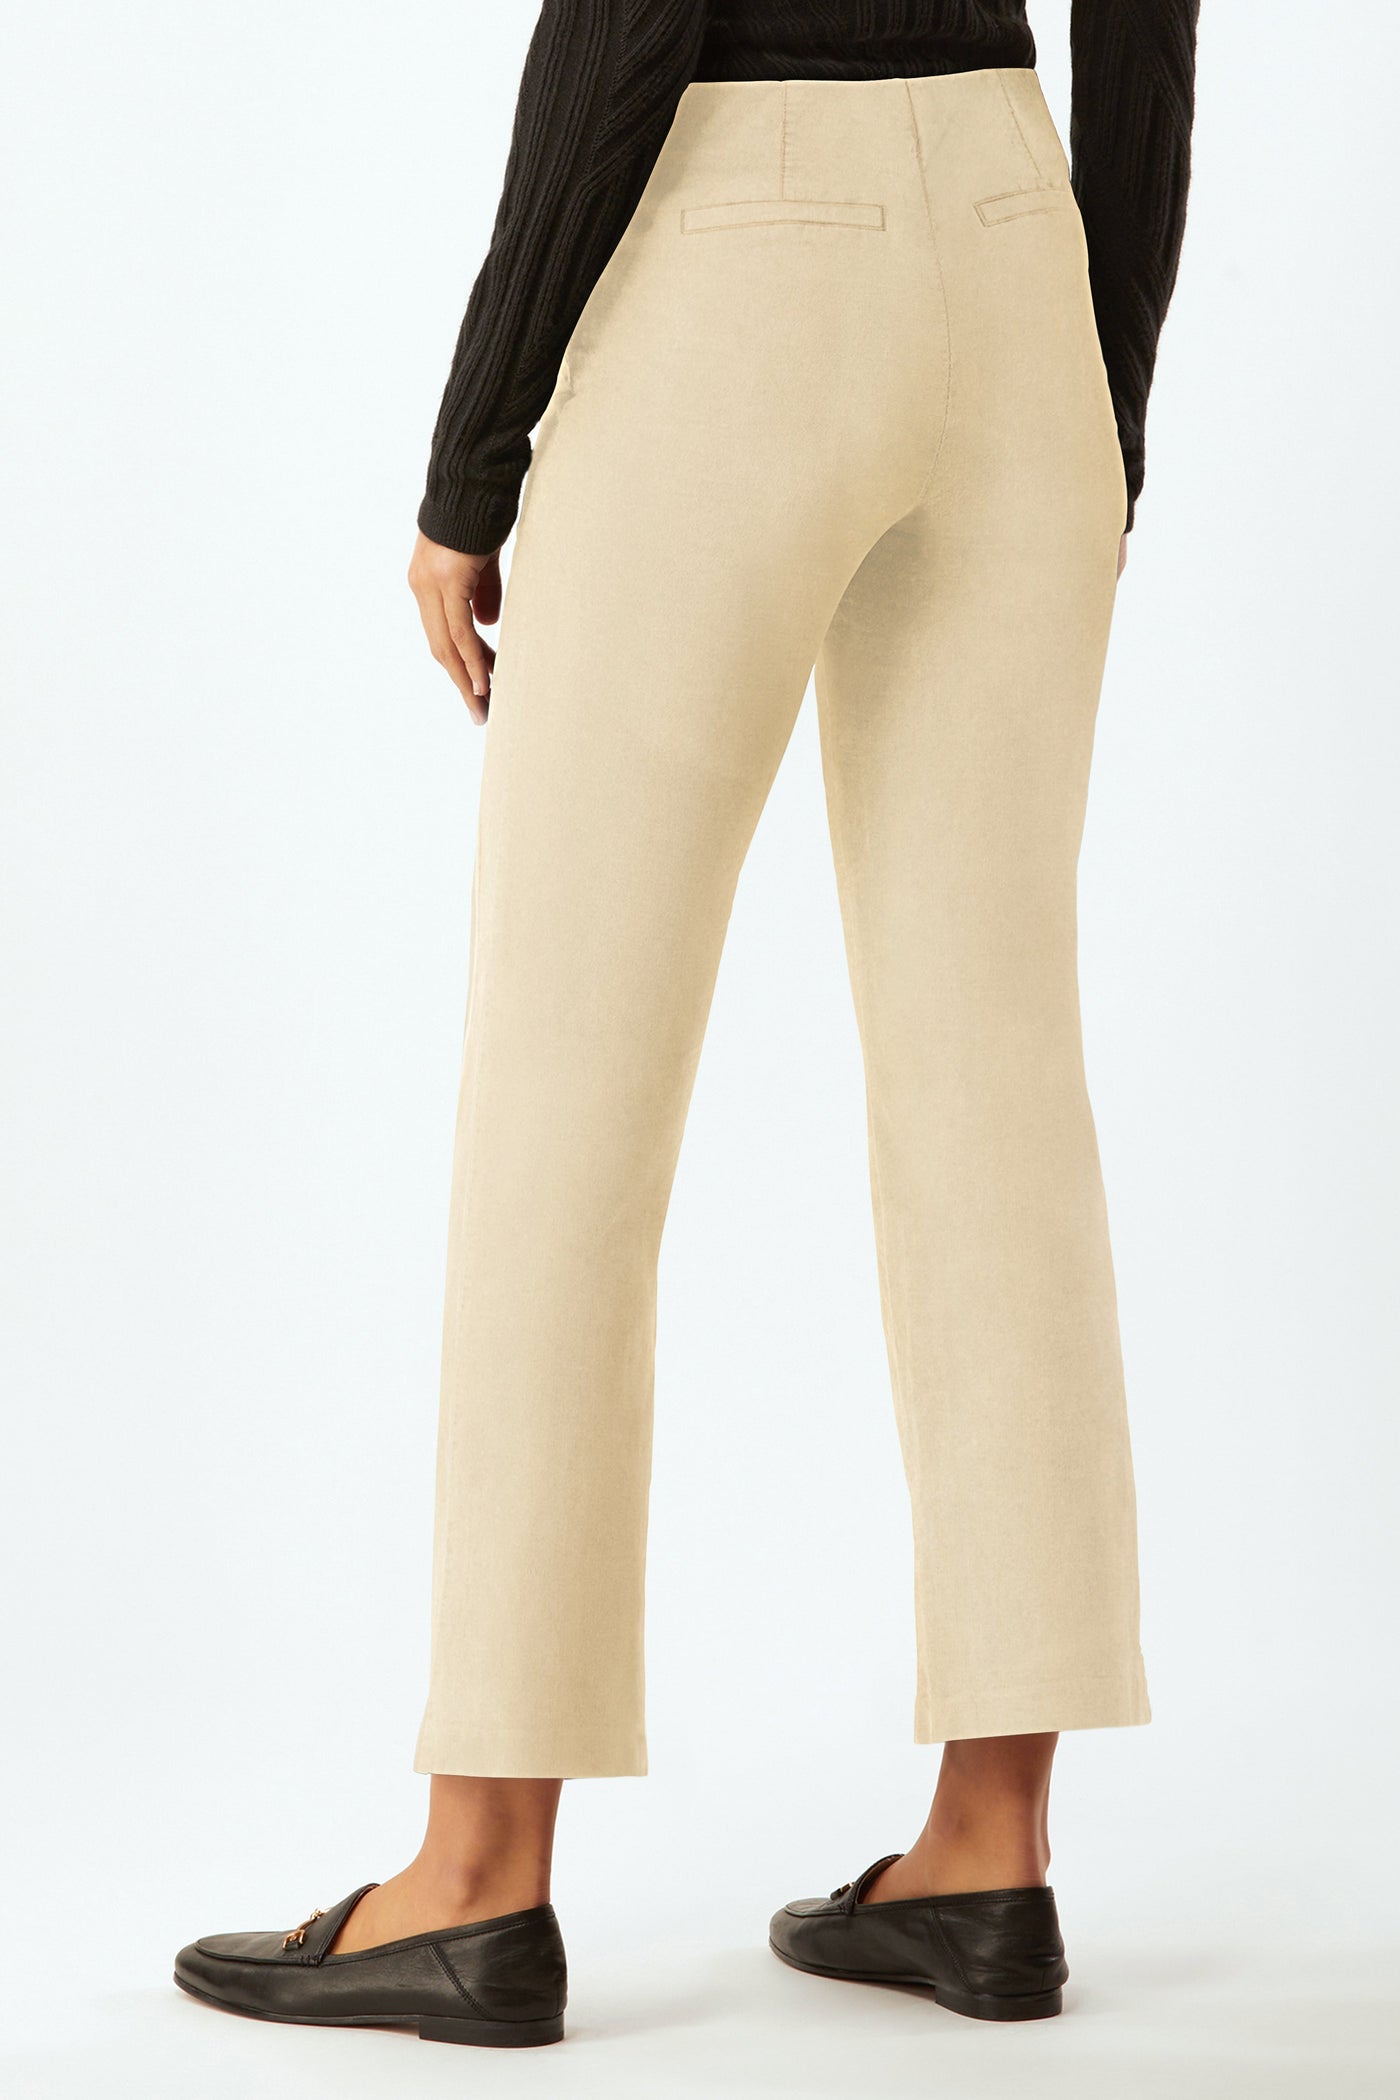 Prince Cropped Flare Pant In Corduroy - Sandstone